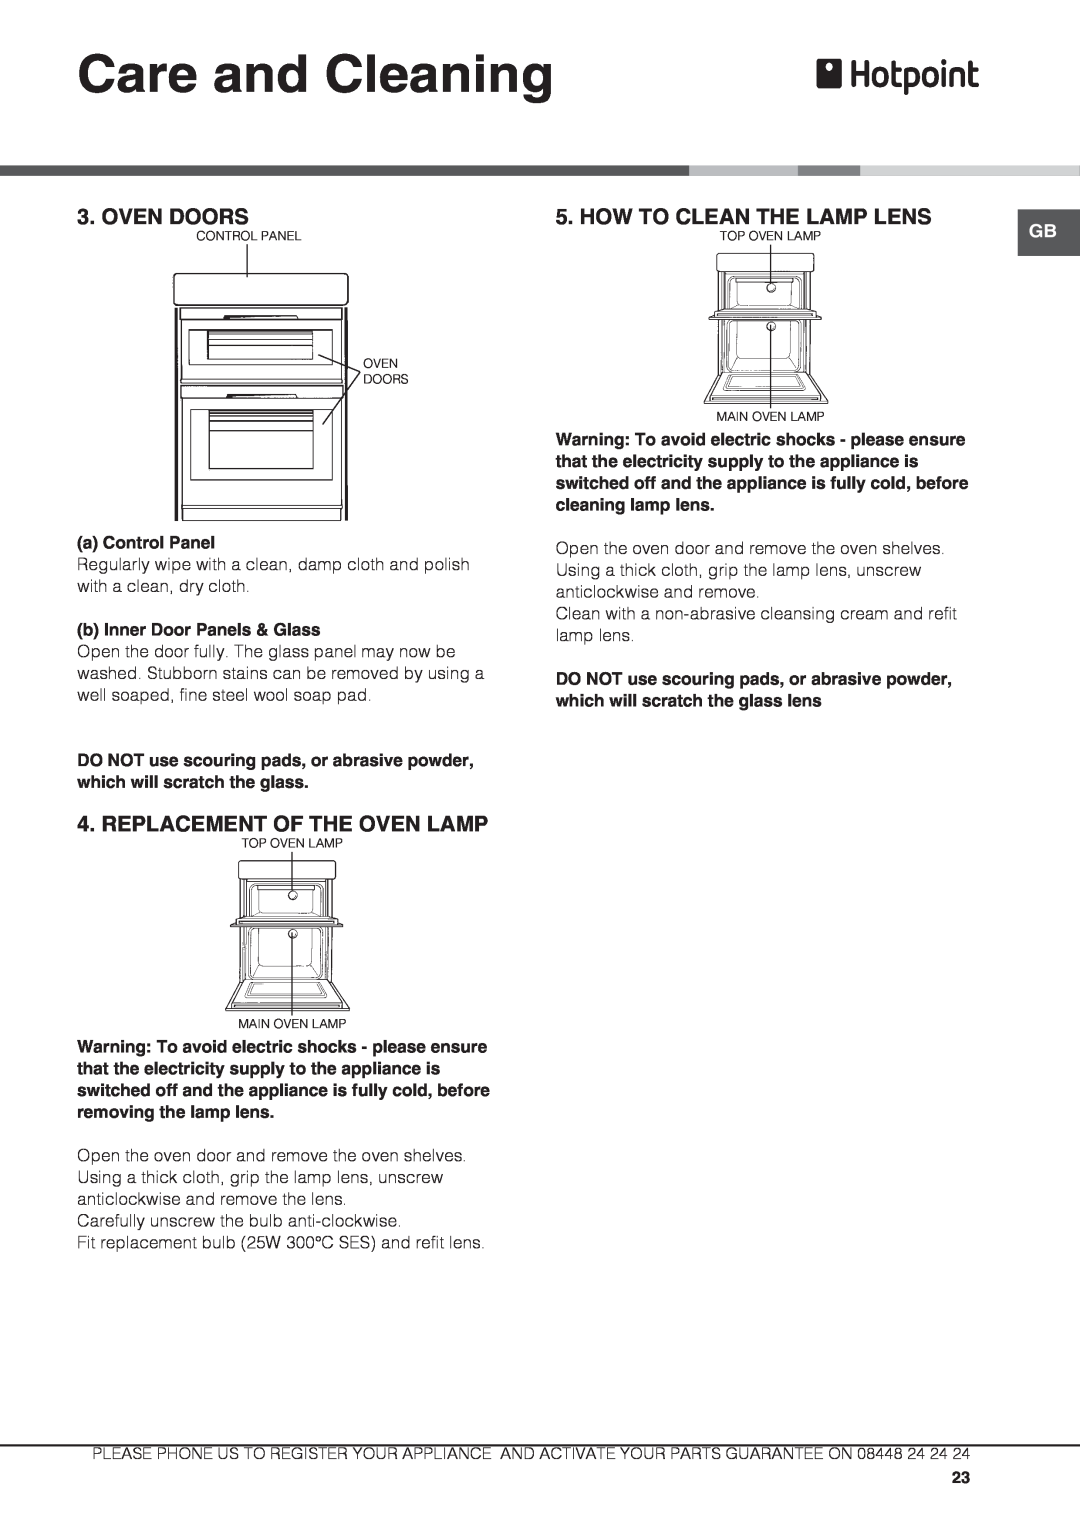 Hotpoint DX 1032 CX S manual Care and Cleaning, Oven Doors, How To Clean The Lamp Lens, Replacement Of The Oven Lamp 